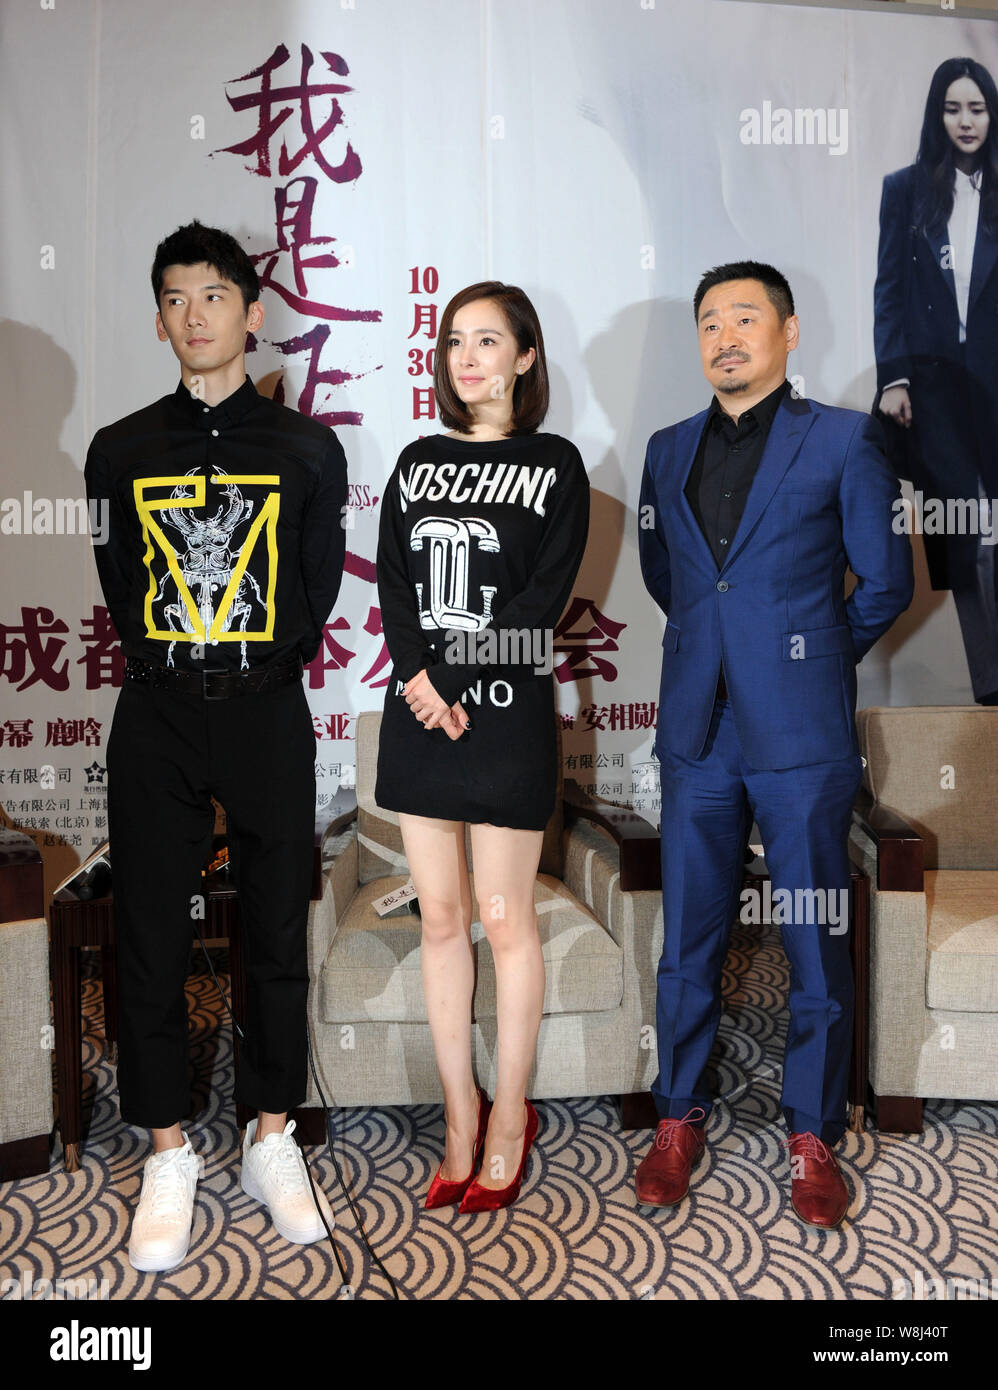 (From left) Chinese actor Liu Ruilin, actress Yang Mi and actor Wang Jingchun attend a press conference for their movie "The Witness" in Chengdu city, Stock Photo